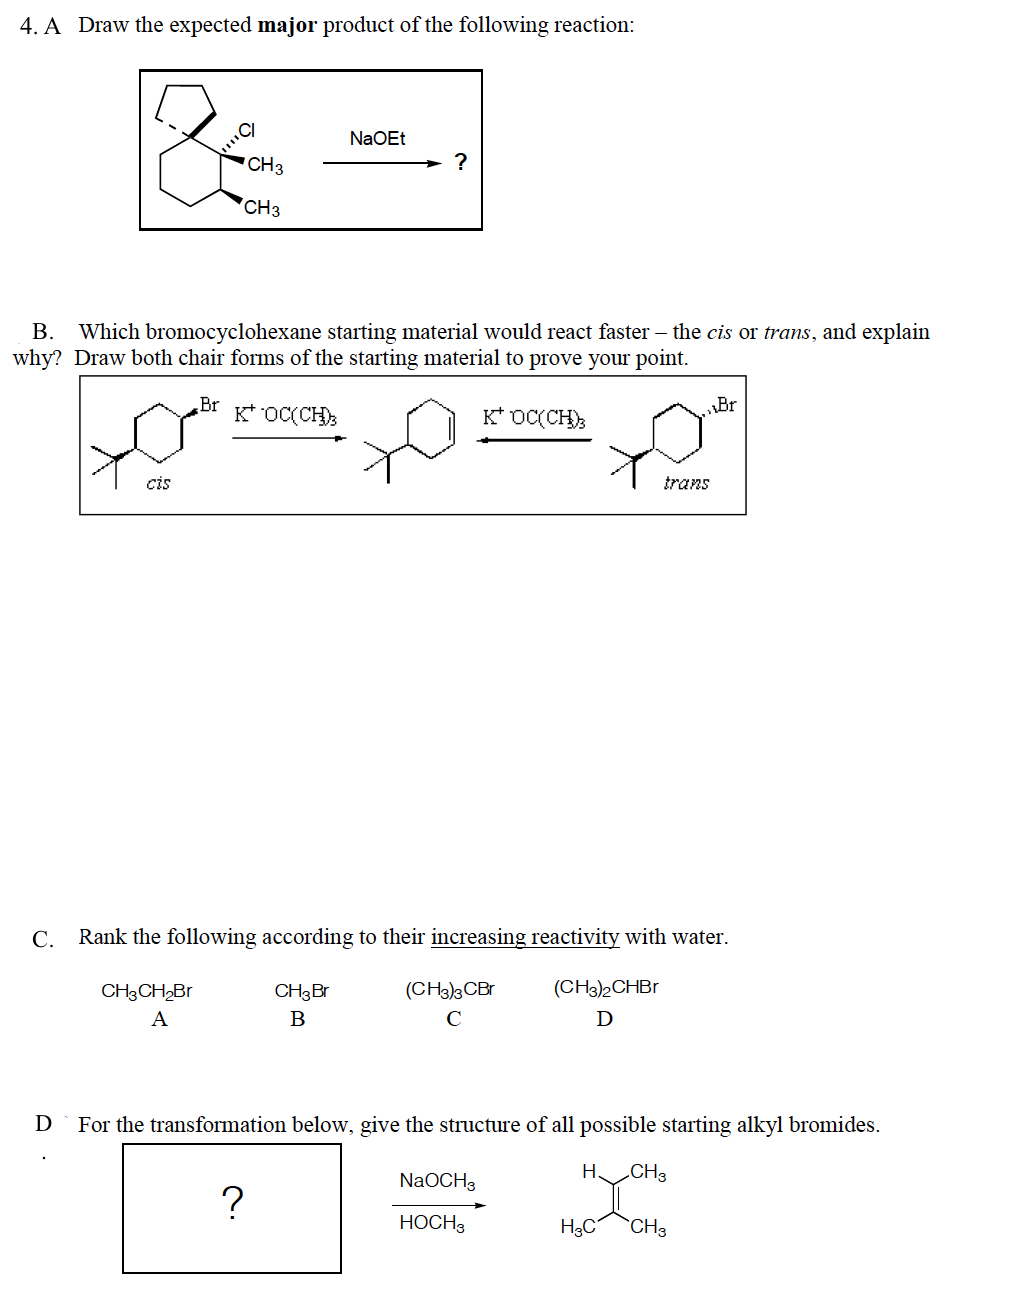 4. A Draw the expected major product of the following reaction:
NaOEt
CH3
CH3
B. Which bromocyclohexane starting material would react faster – the cis or trans, and explain
why? Draw both chair forms of the starting material to prove your point.
Br
K* OC(CH)
K* OC(CH);
Br
cis
trans
С.
Rank the following according to their increasing reactivity with water.
CH3CH,Br
CH3Br
(CH3)3CBr
(CH3)2CHBI
A
B
C
D
D
For the transformation below, give the structure of all possible starting alkyl bromides.
H CH3
NaOCH3
НОСН
H3C
CH3
